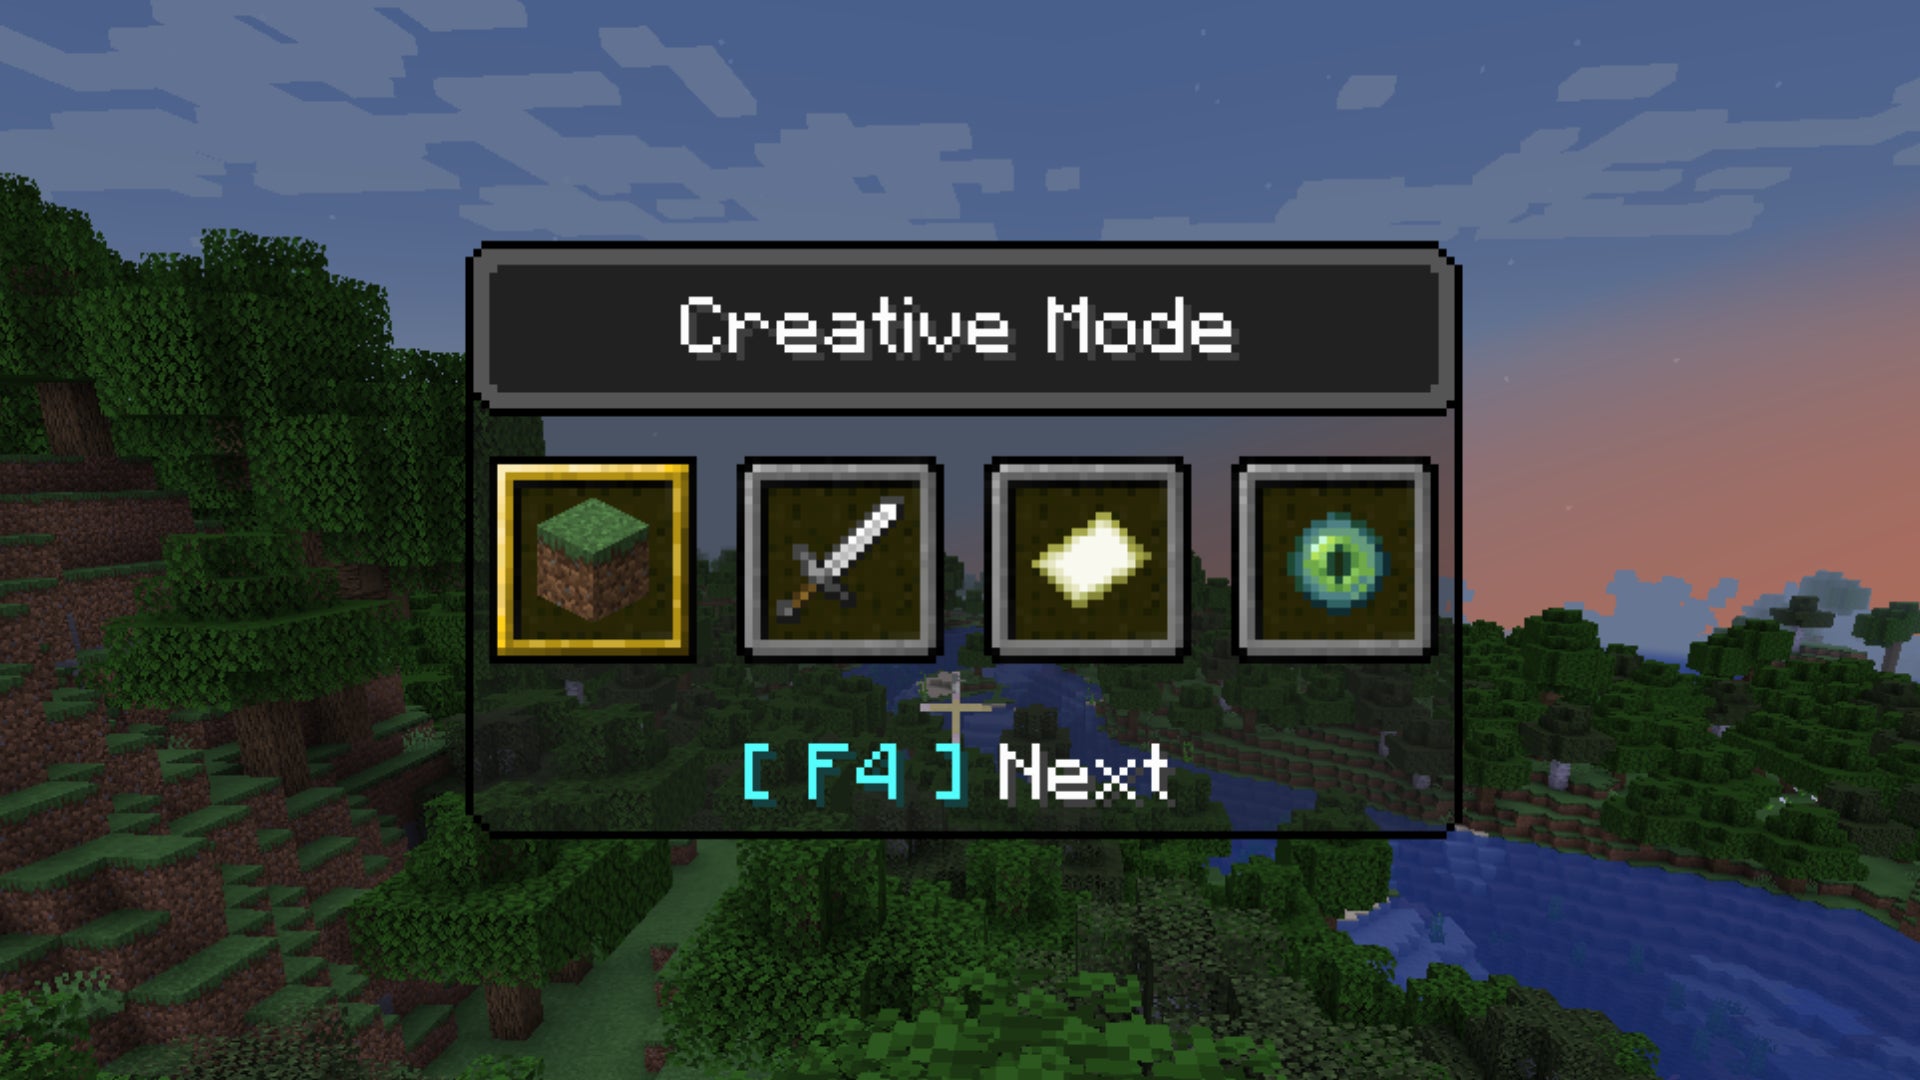 The game mode switcher panel in Minecraft, with Creative Mode selected.